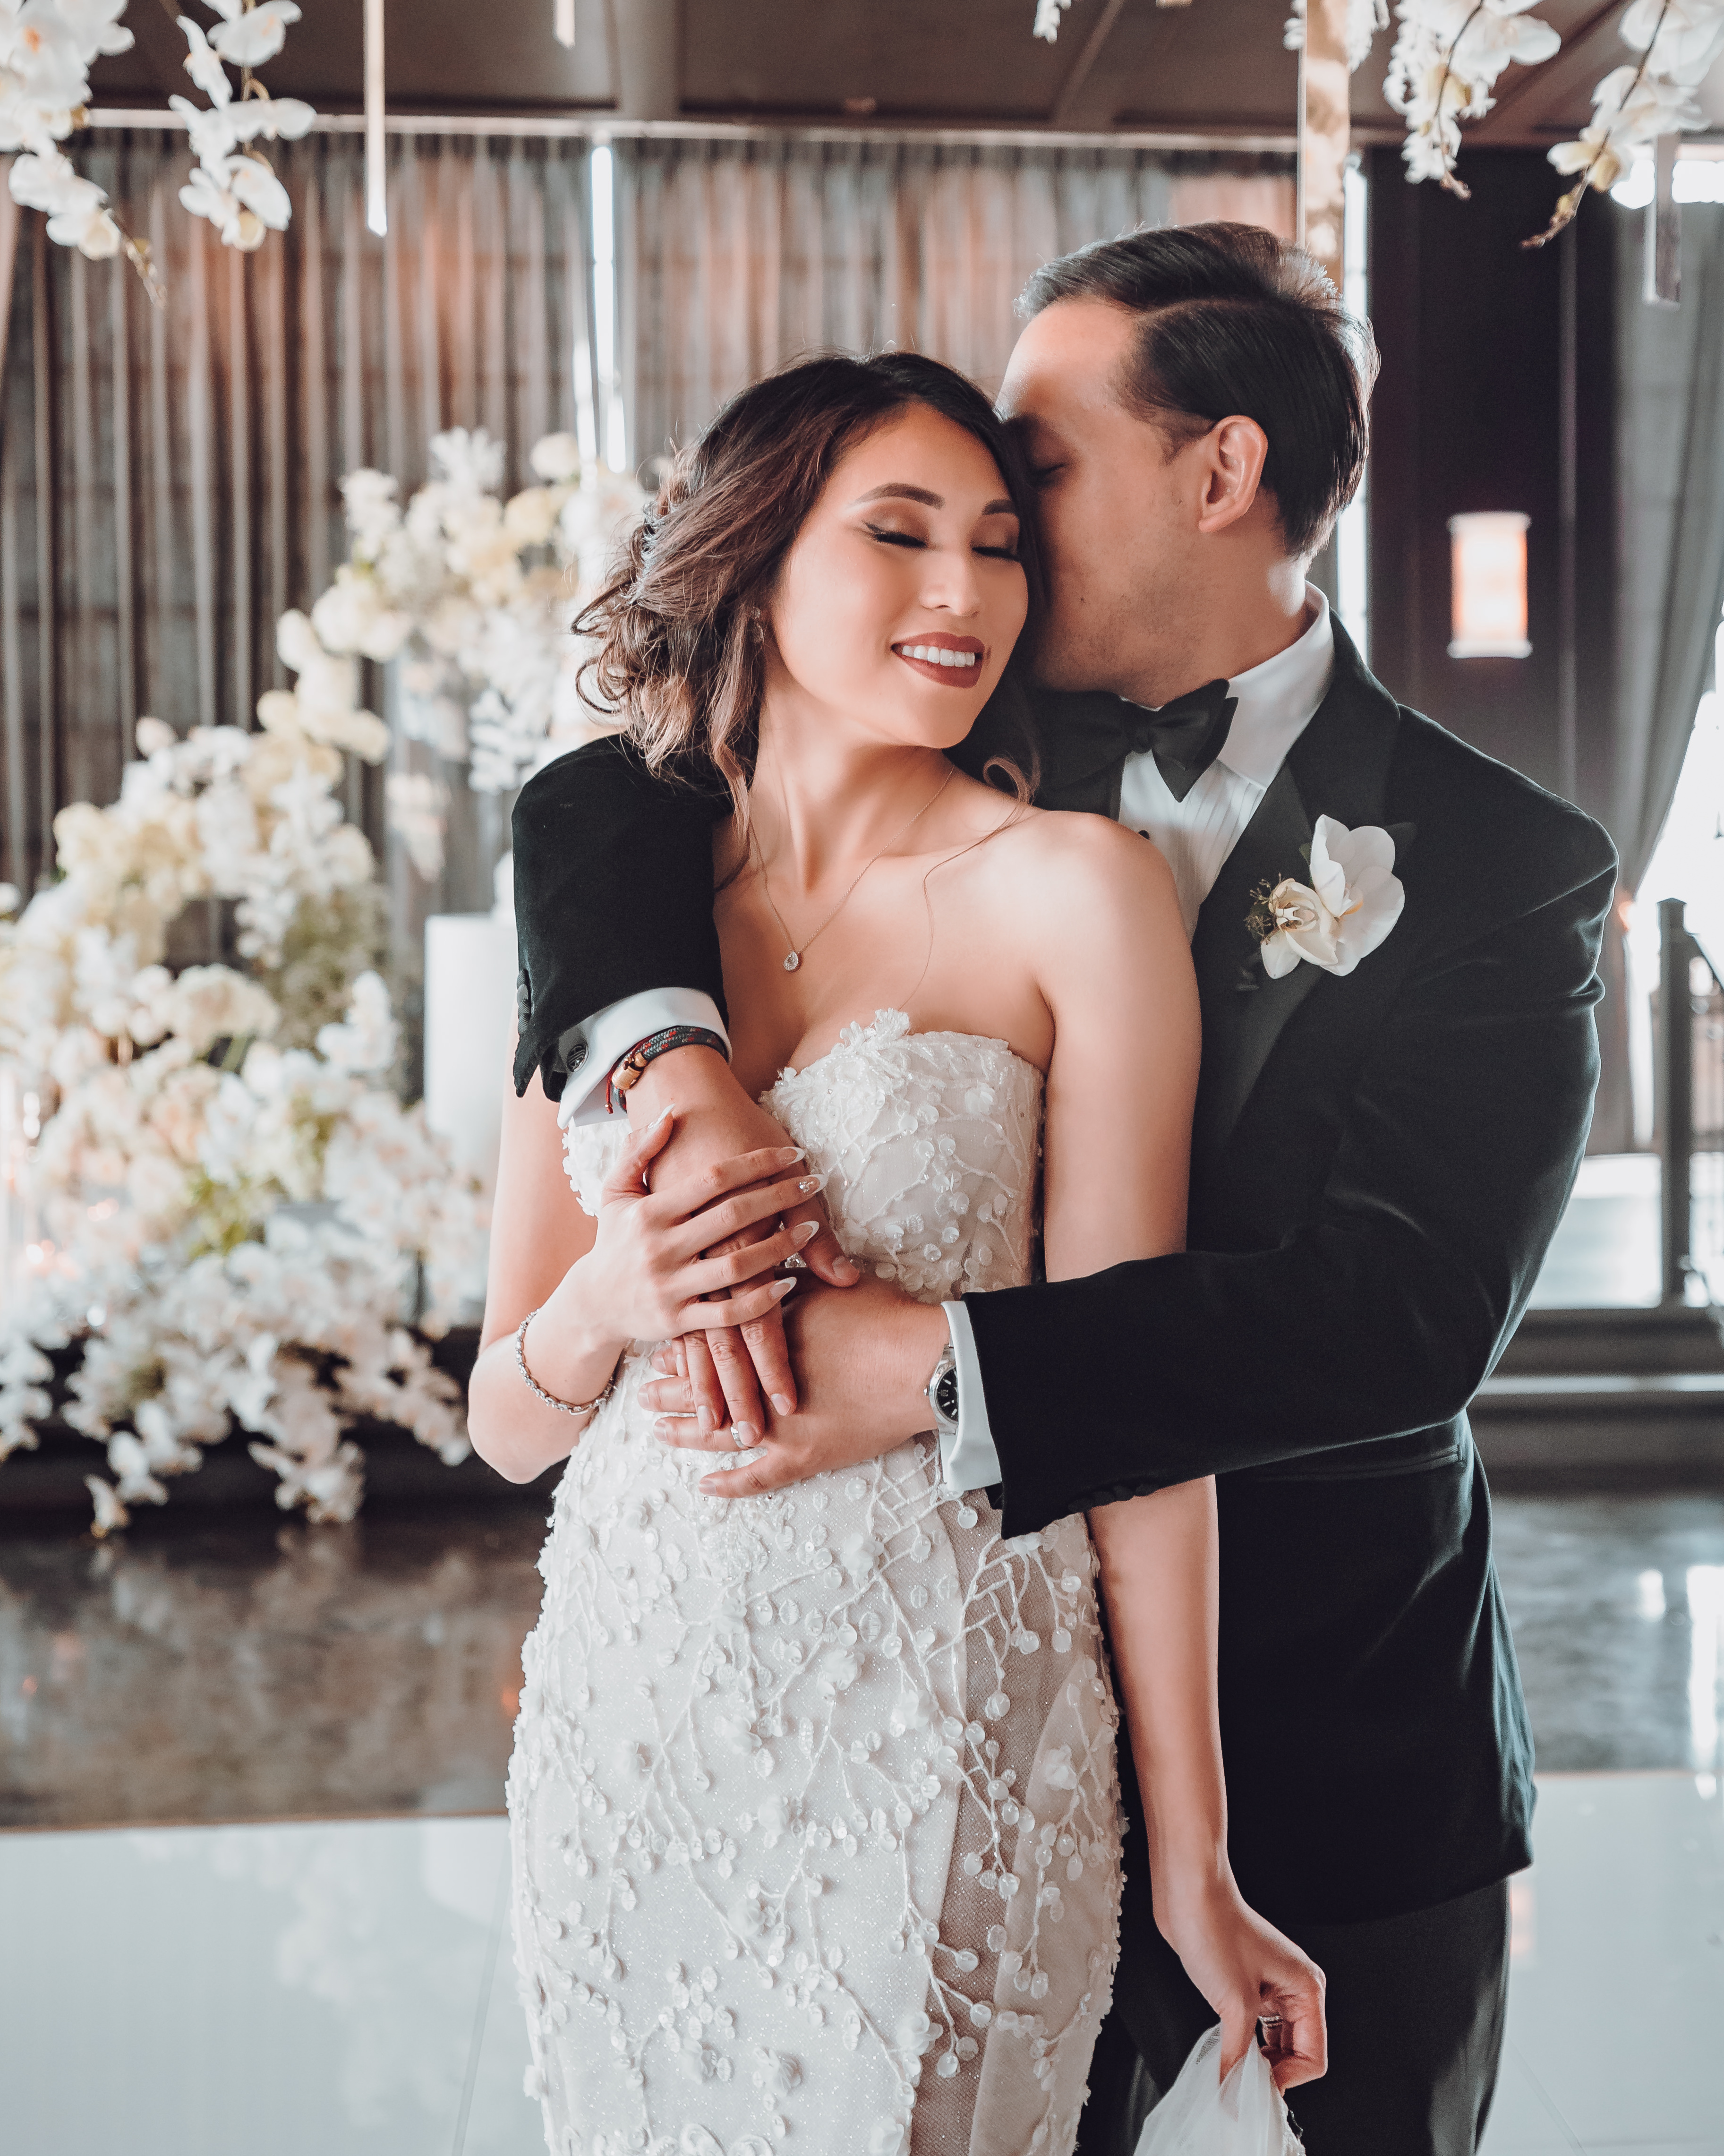 A groom hugs his bride from behind as she closes her eyes and smiles. They are standing in the reception room of their wedding venue The Astorian in Houston, TX.